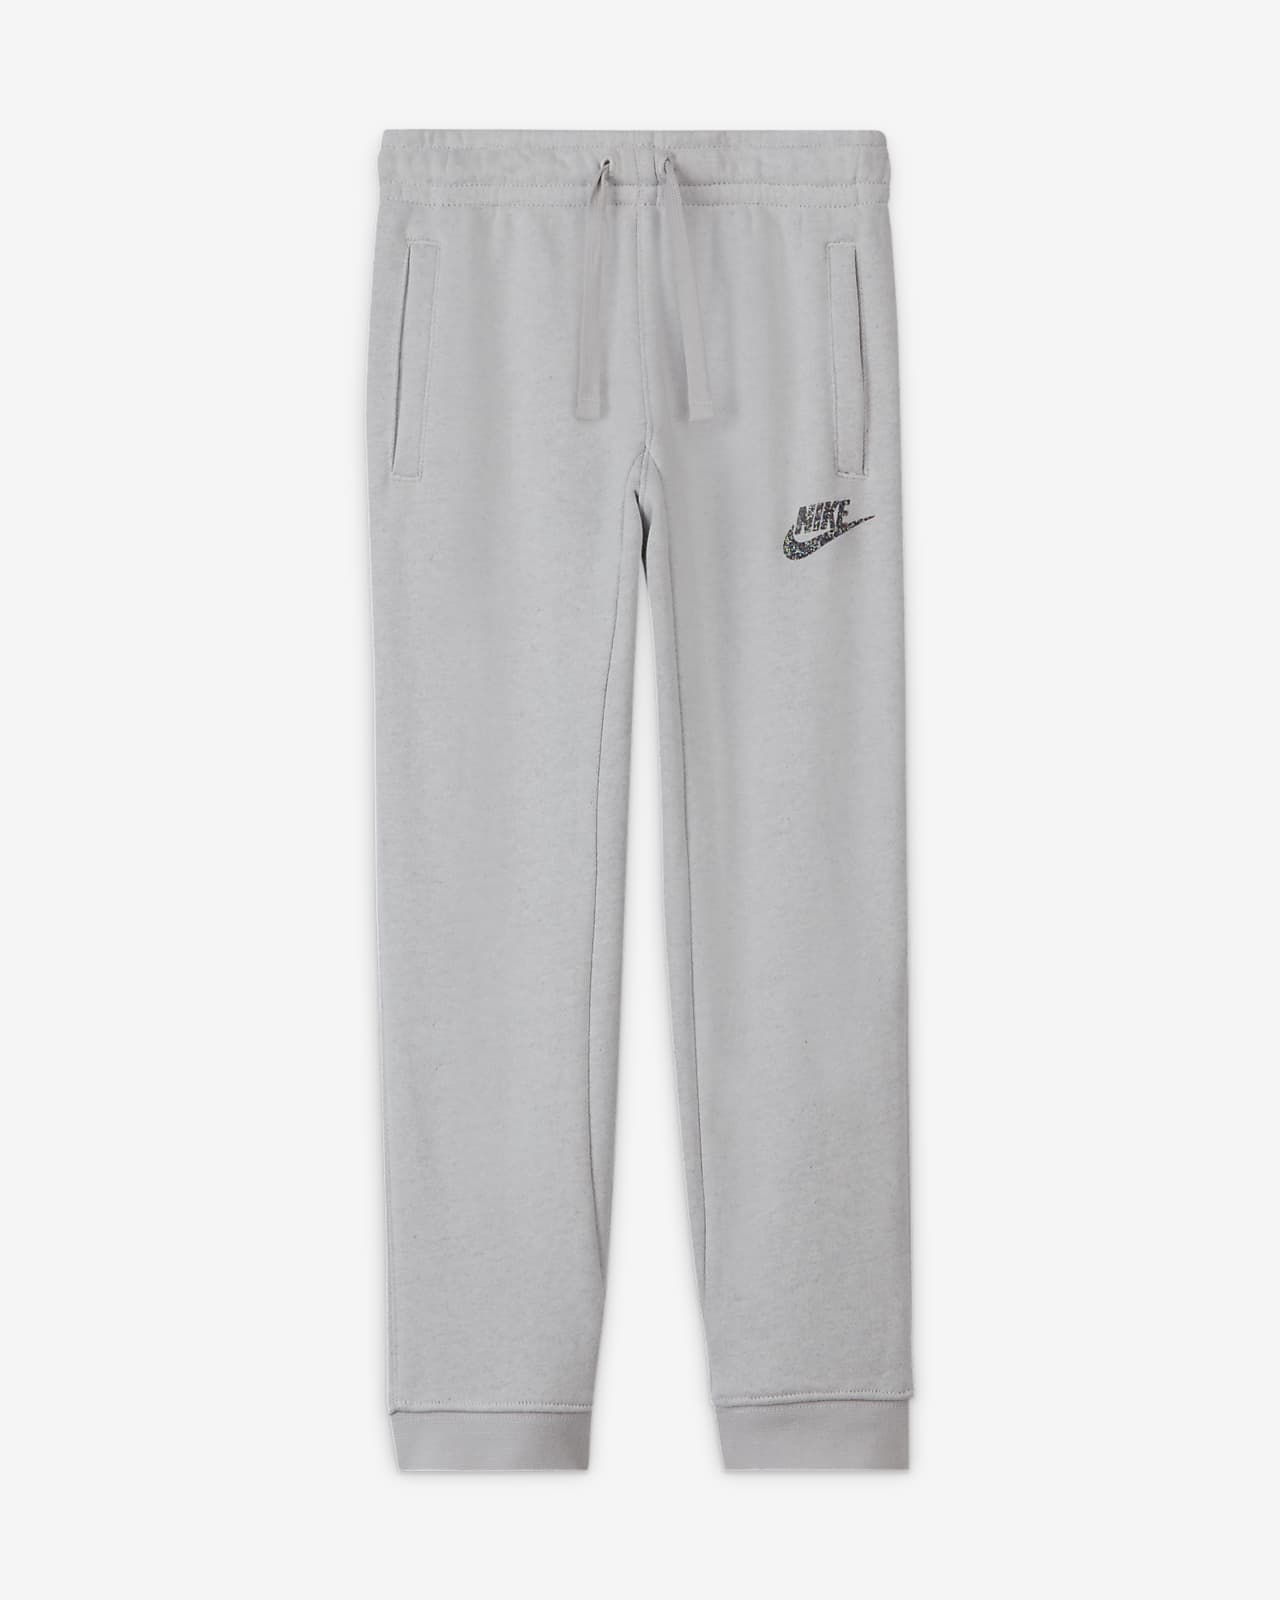 Nike Younger Kids' Trousers